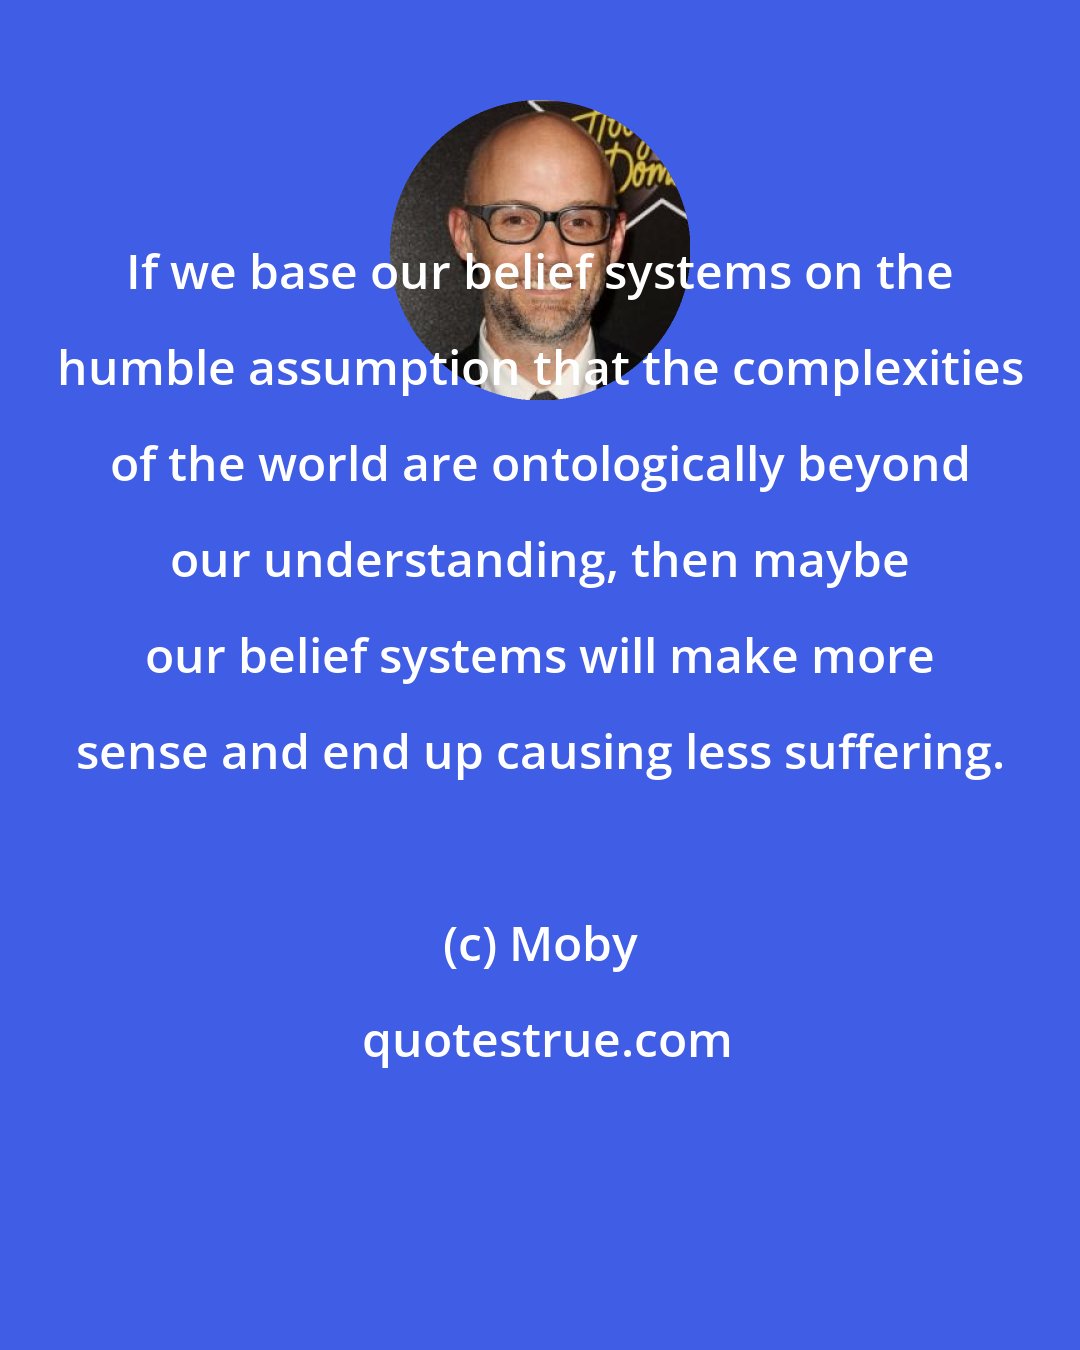 Moby: If we base our belief systems on the humble assumption that the complexities of the world are ontologically beyond our understanding, then maybe our belief systems will make more sense and end up causing less suffering.